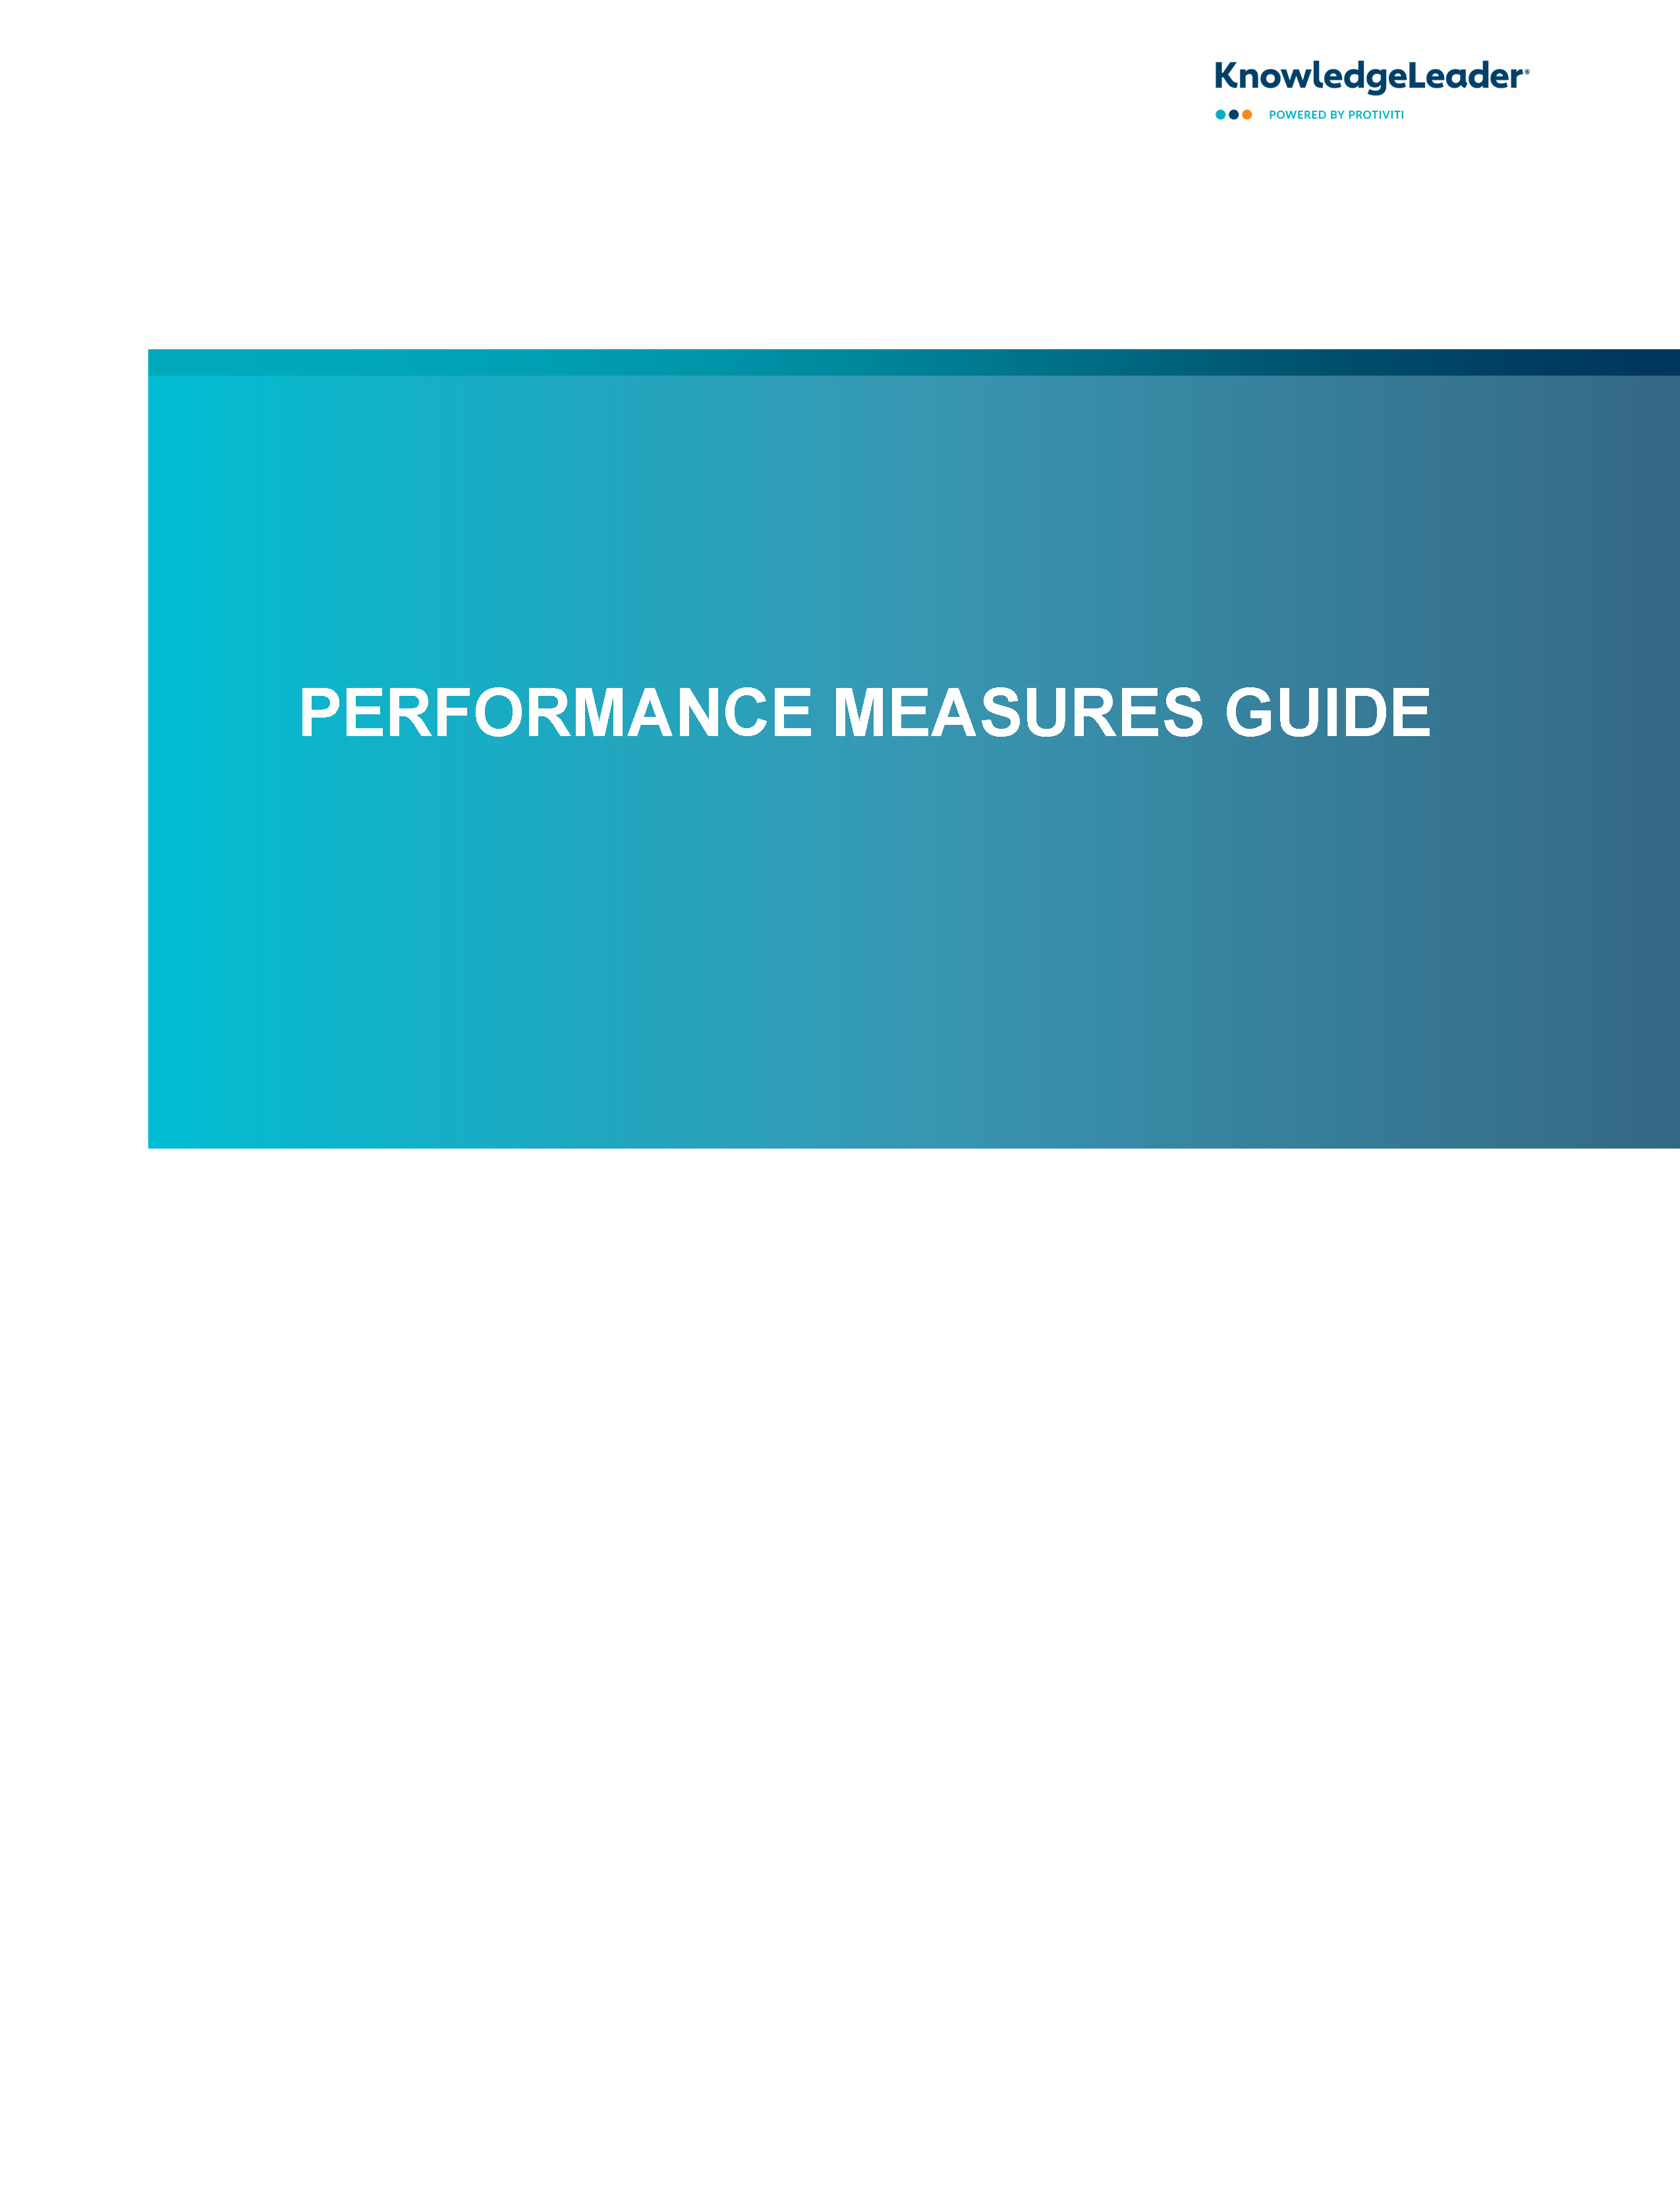 Screenshot of the first page of Performance Measures Guide